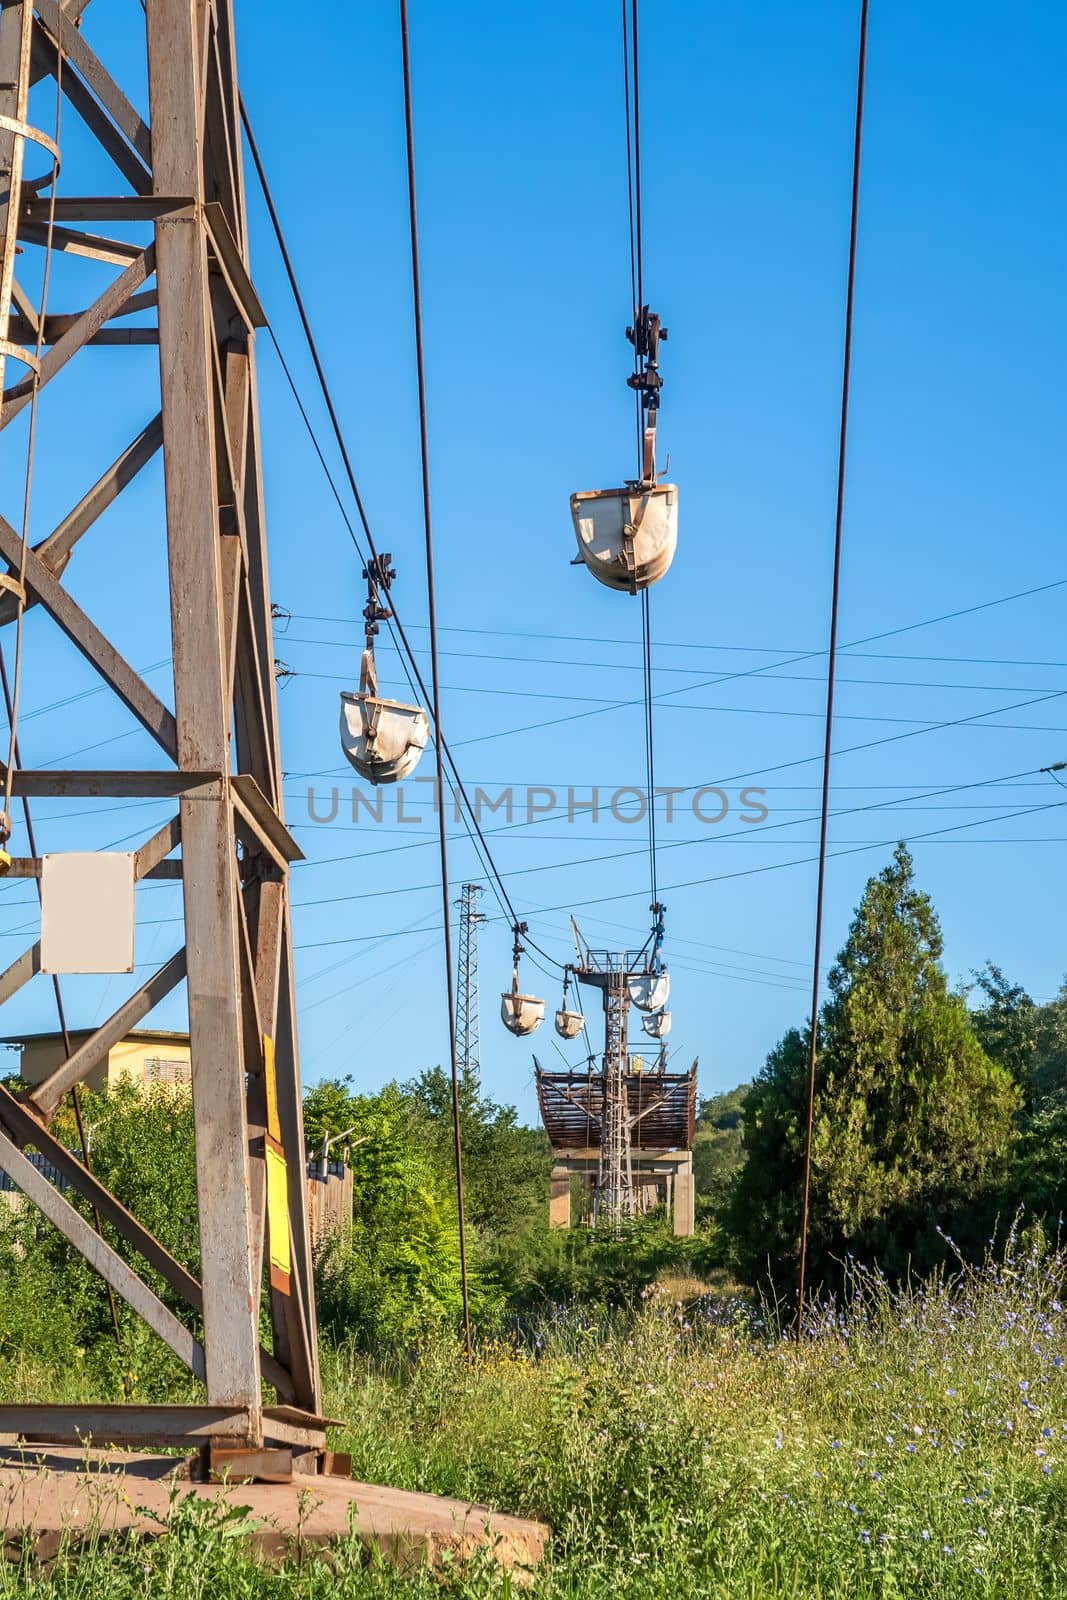 Aerial ropeway bucketwagon lift or container transporting ore or stone by EdVal